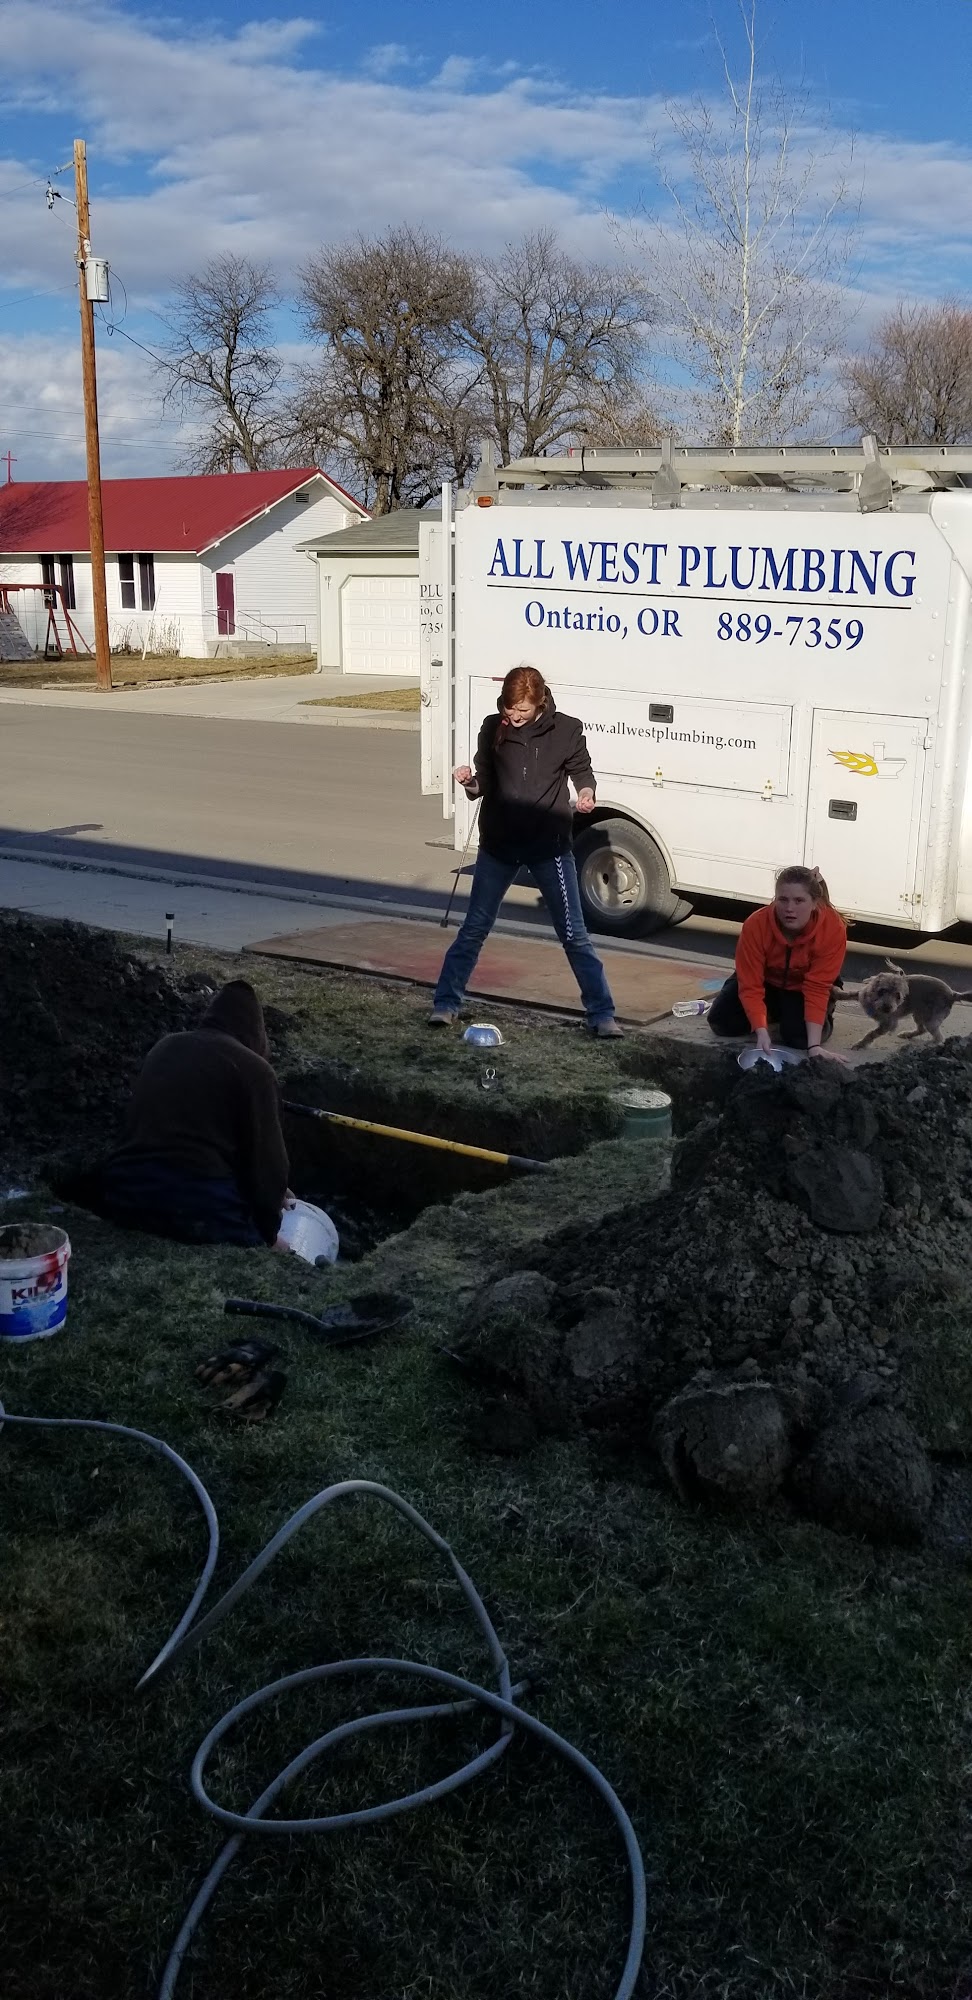 All West Plumbing 460 Foothill Dr, Ontario Oregon 97914